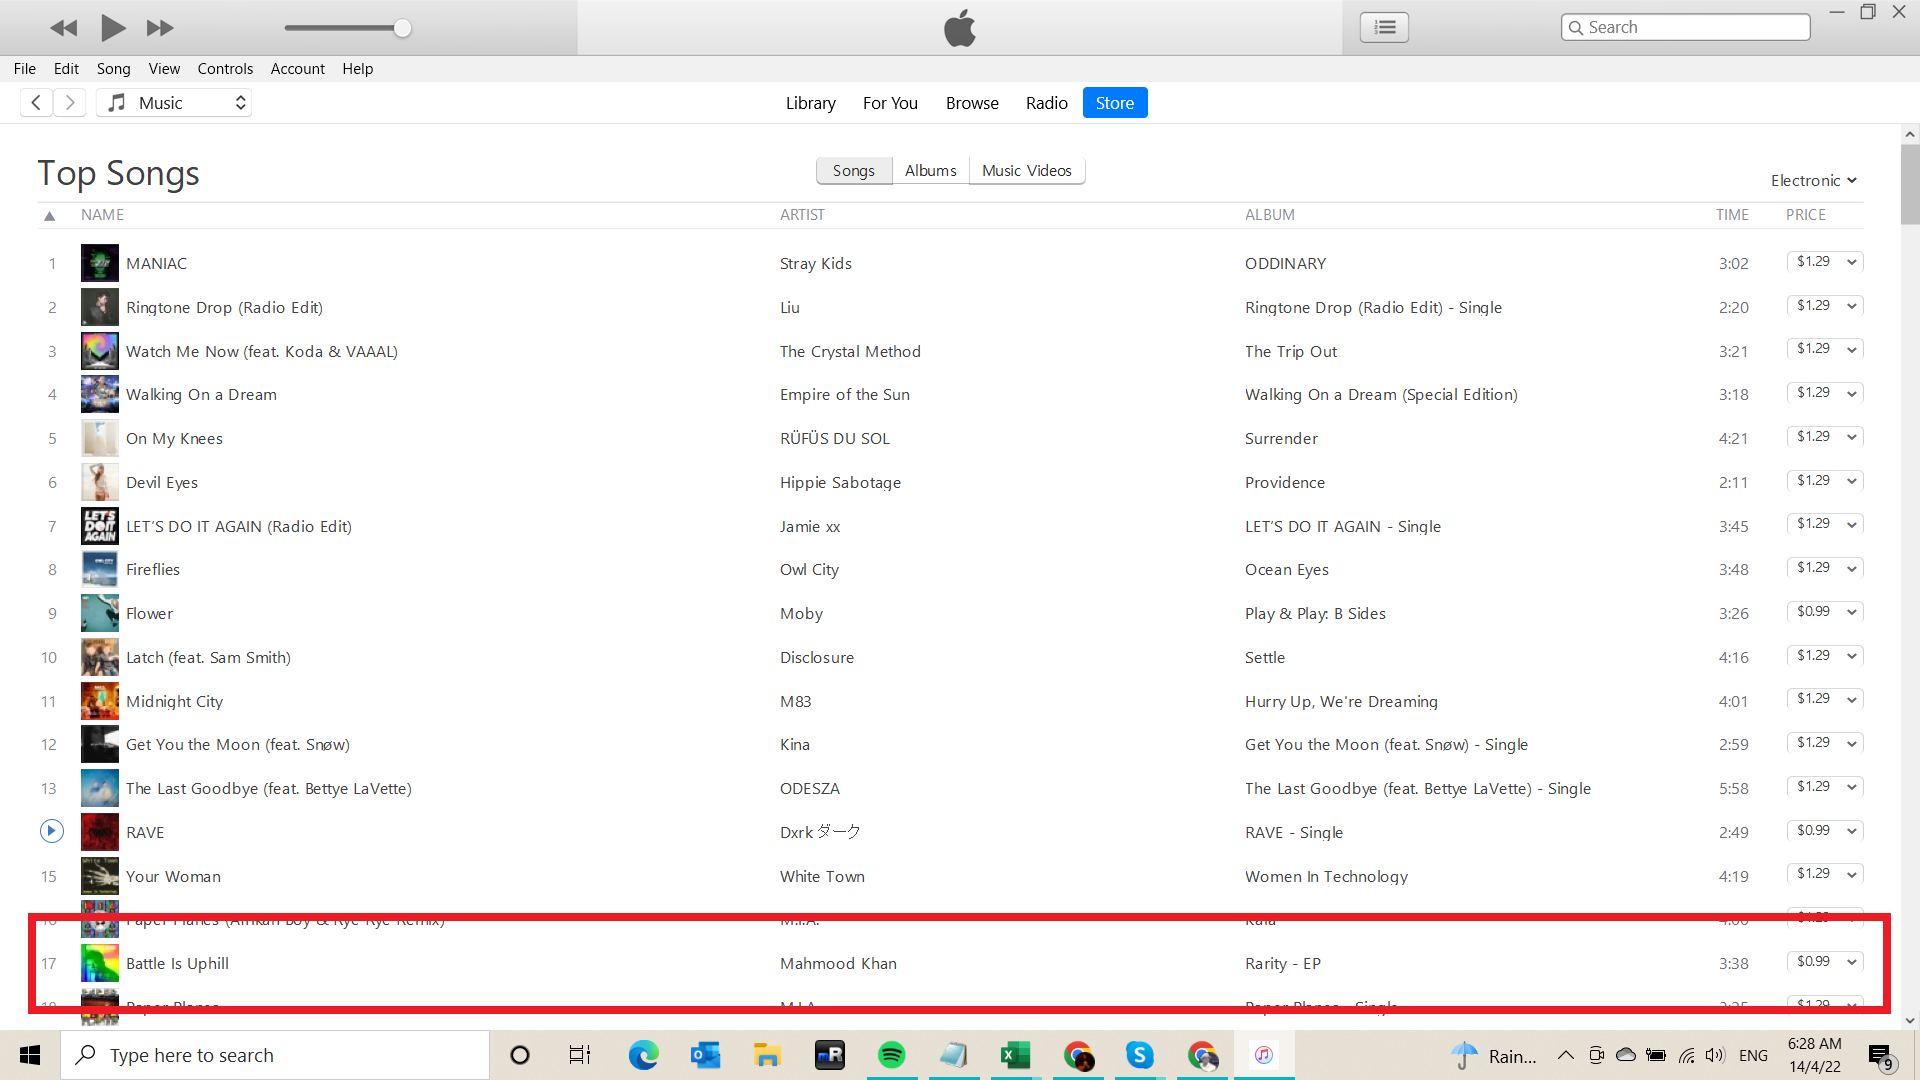 battle is uphill number 17 usa itunes